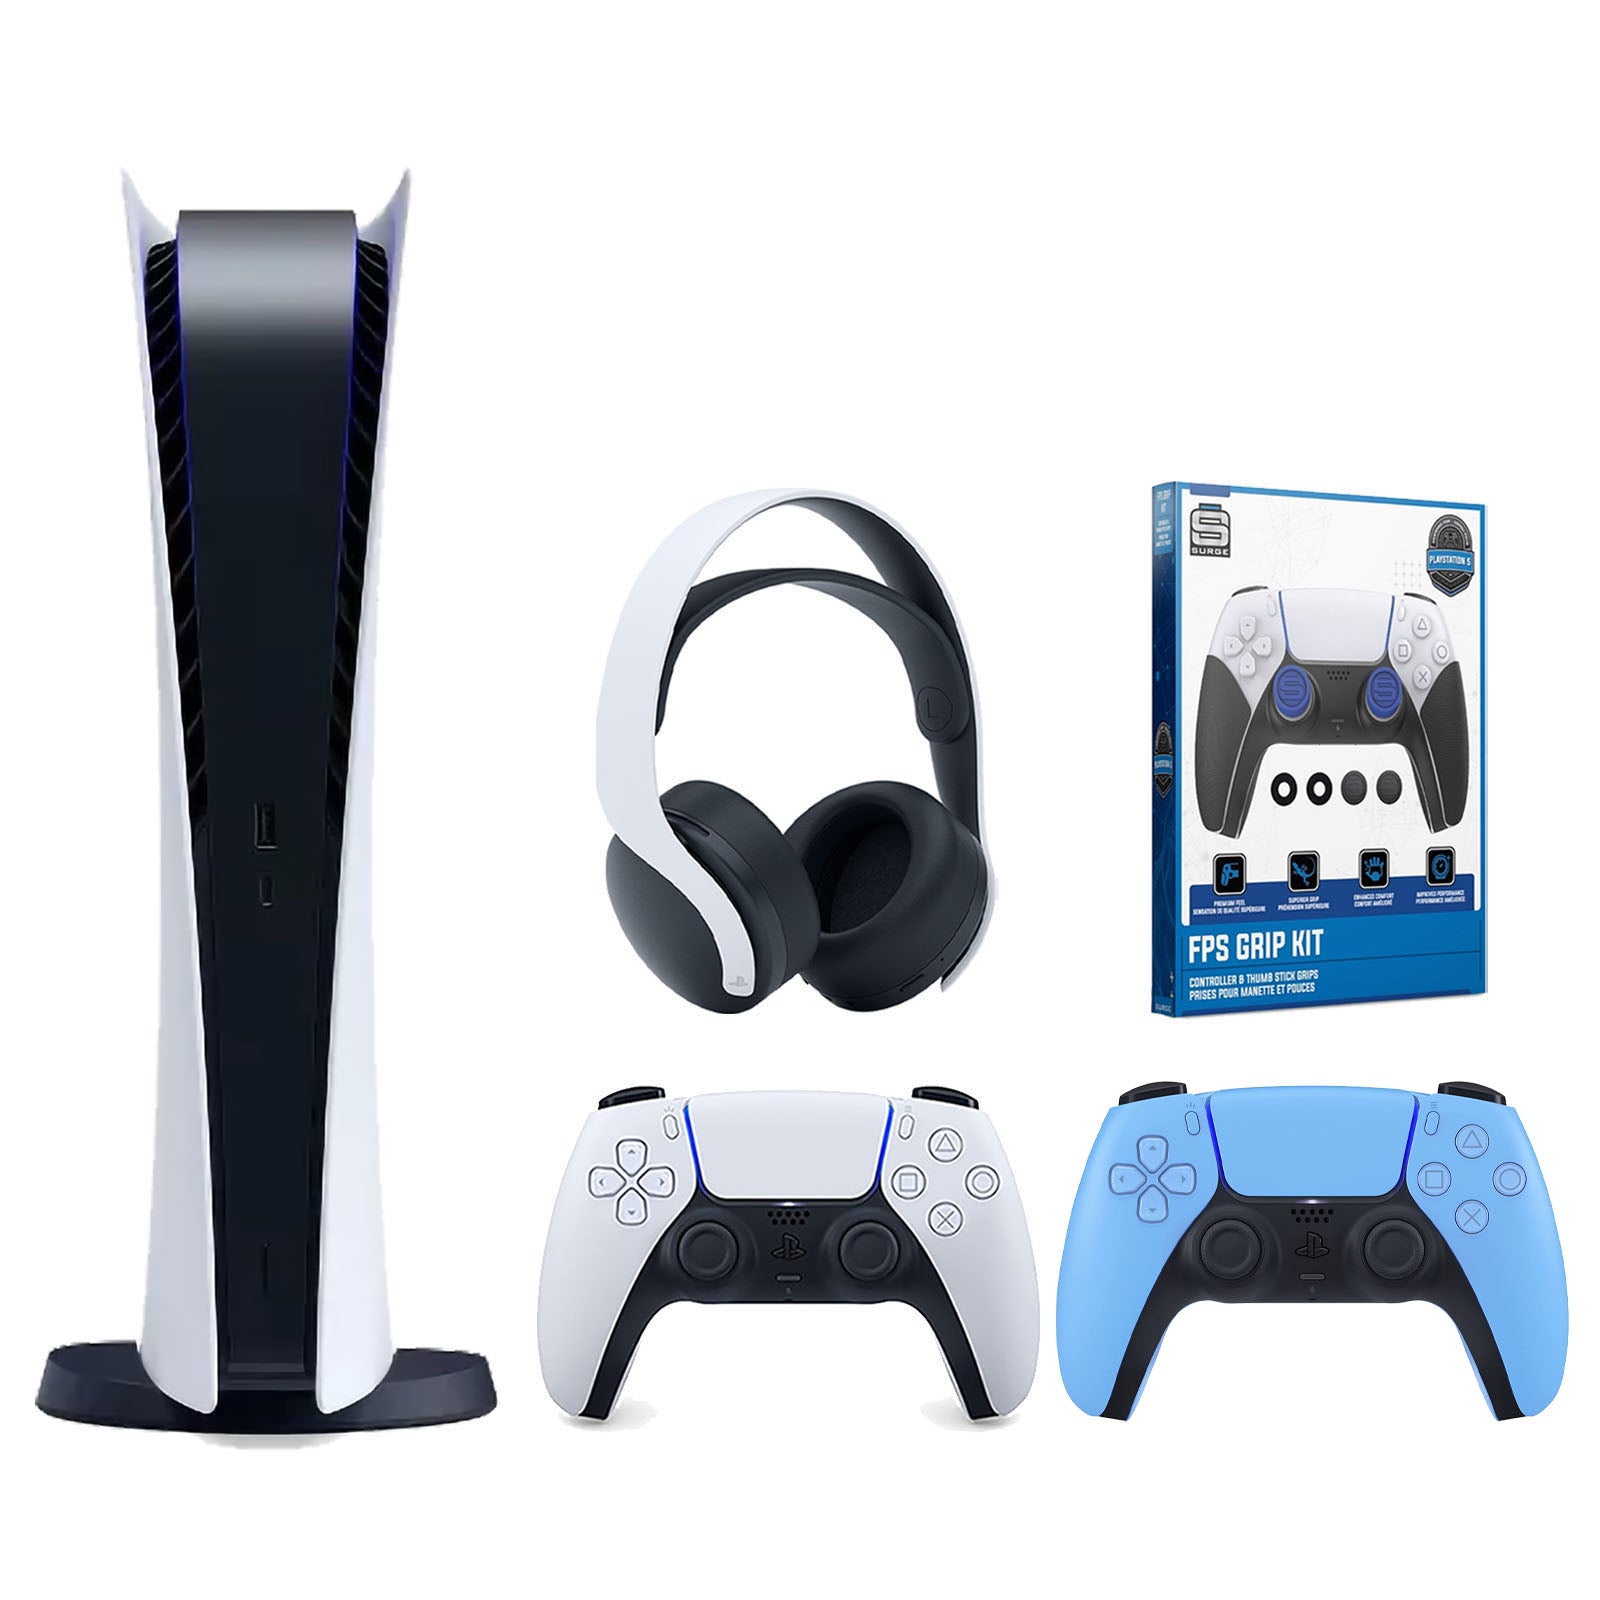 Sony Playstation 5 Digital Edition Console with Extra Blue Controller, White PULSE 3D Headset and Surge FPS Grip Kit With Precision Aiming Rings Bundle - Pro-Distributing